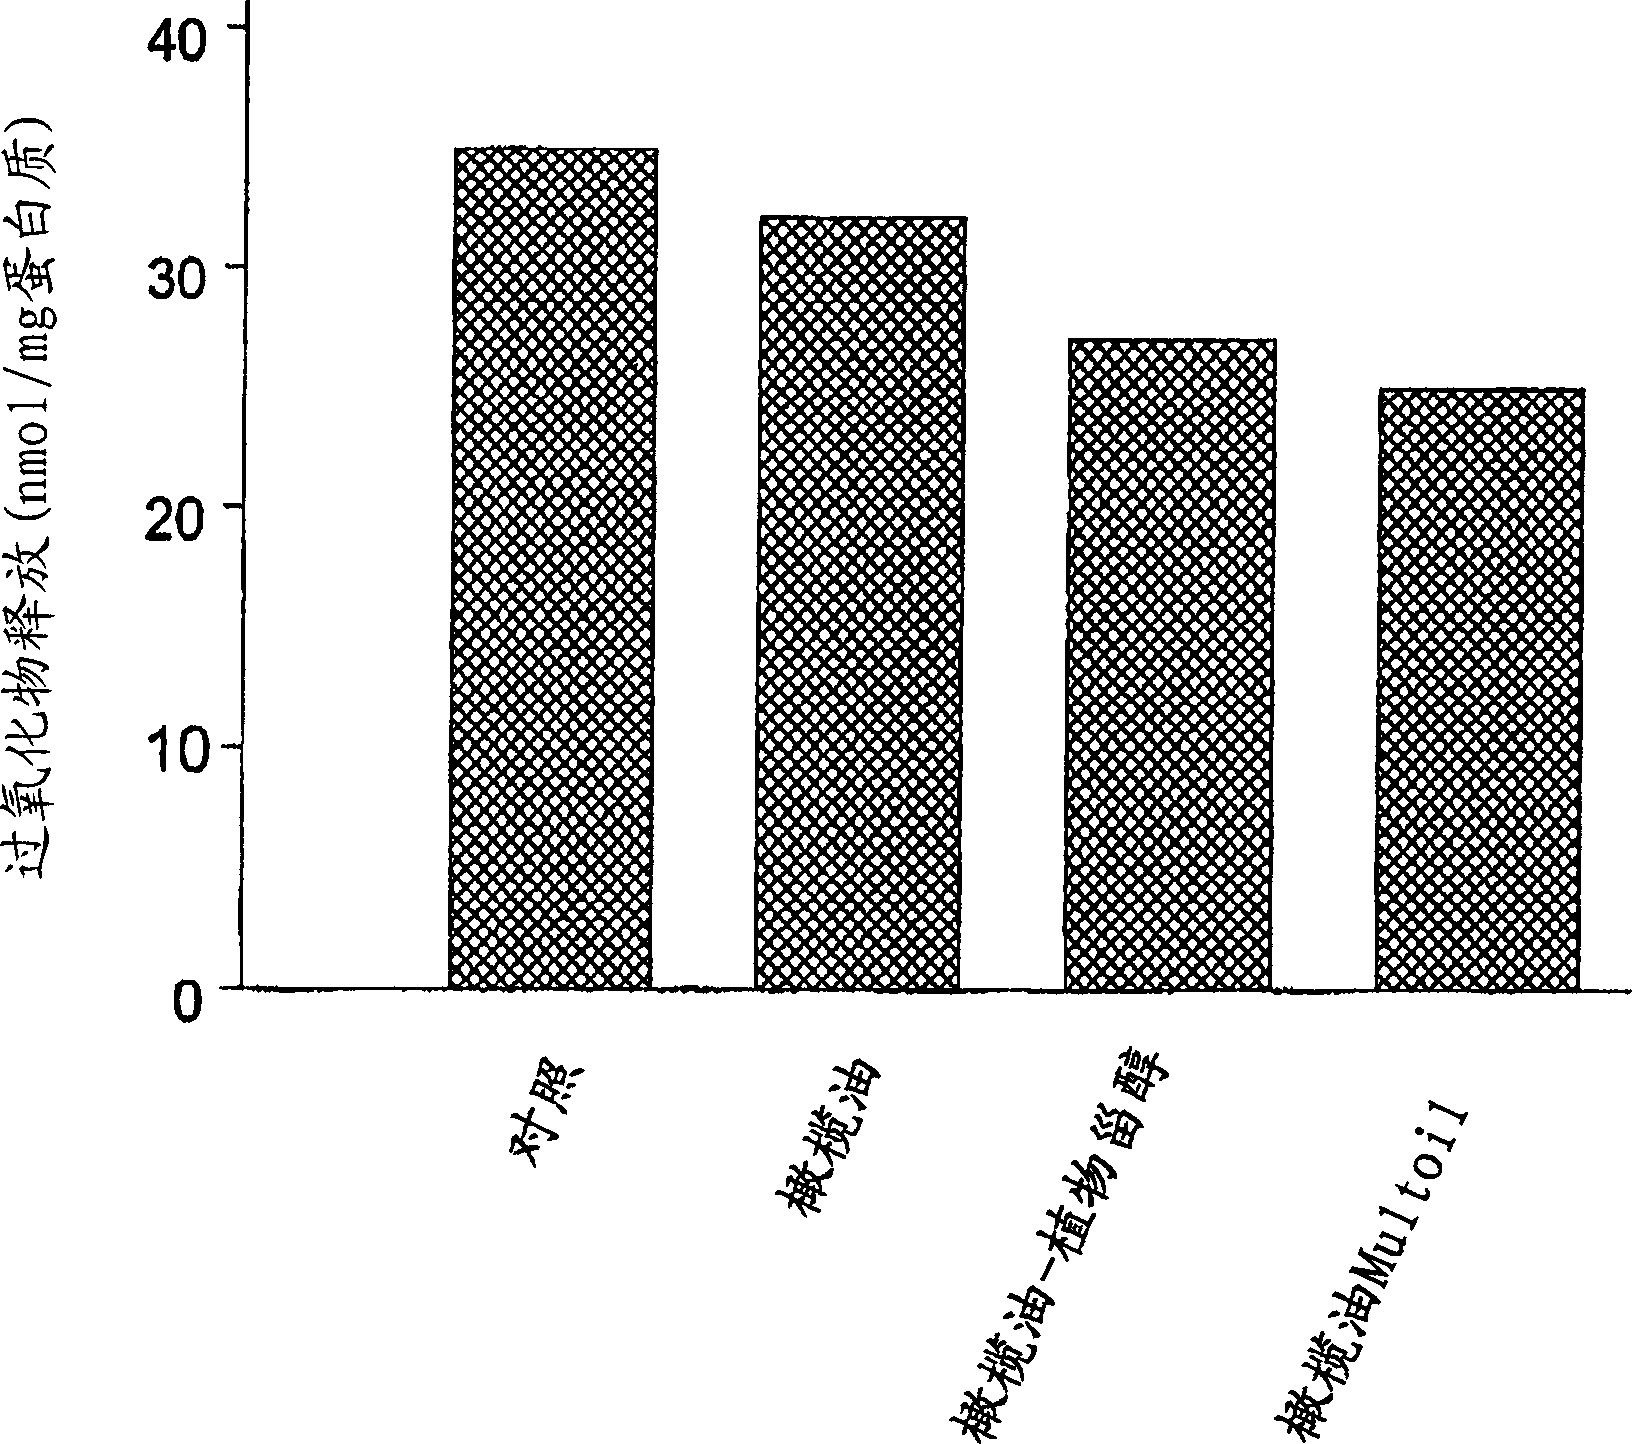 Oils enriched with diacylglycerols and phytosterol esters for use in the reduction of blood cholestrol and triglycerides and oxidative stress